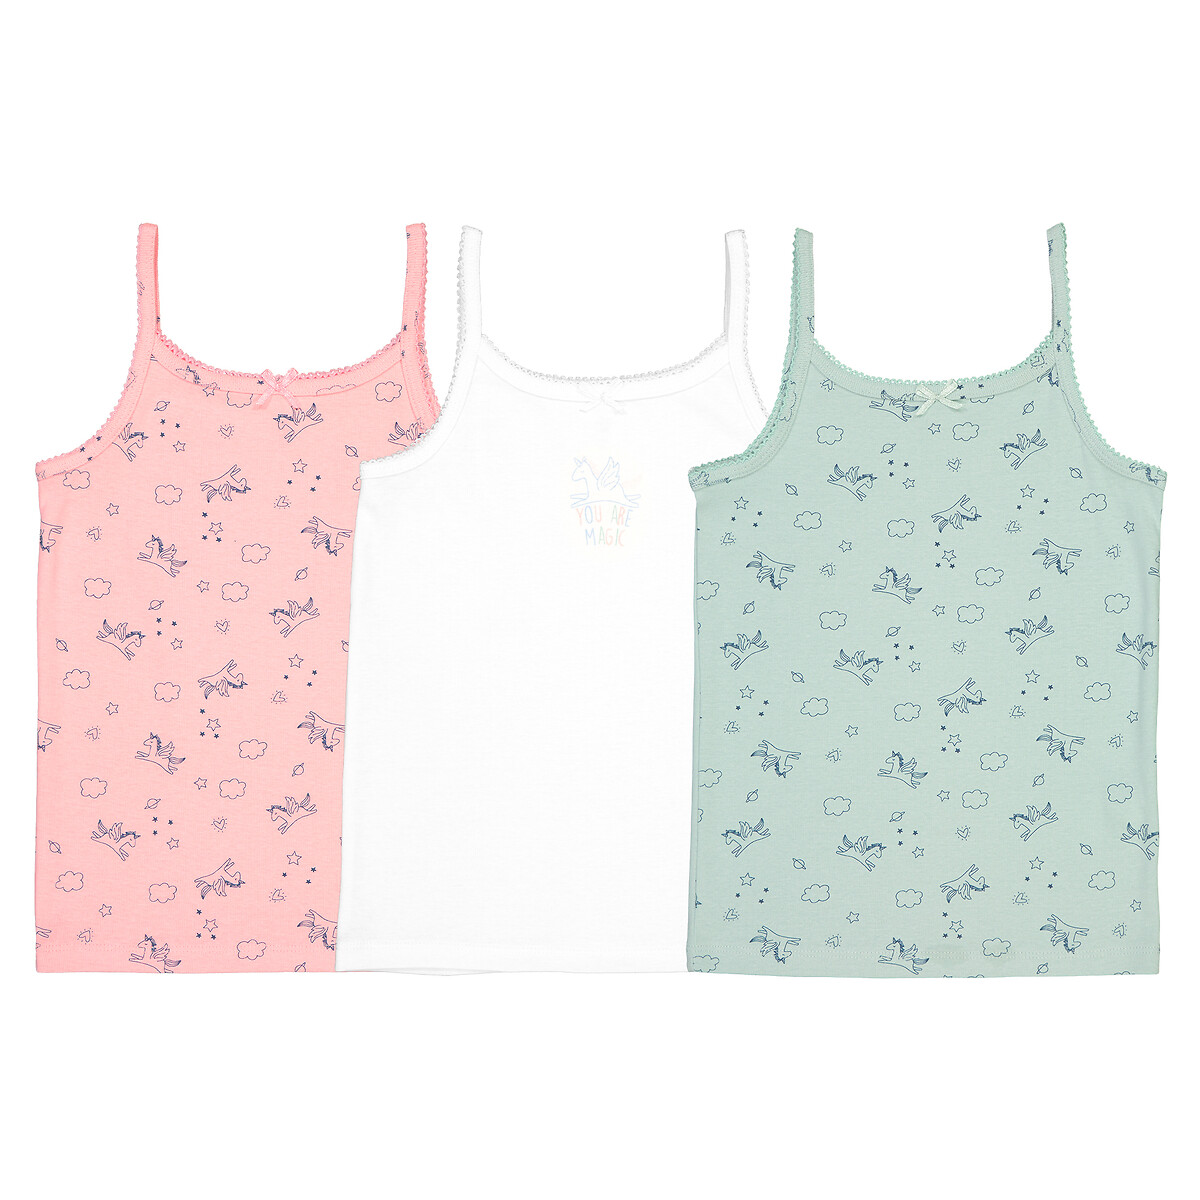 Pack of 3 Vest Tops in Unicorn Print Cotton